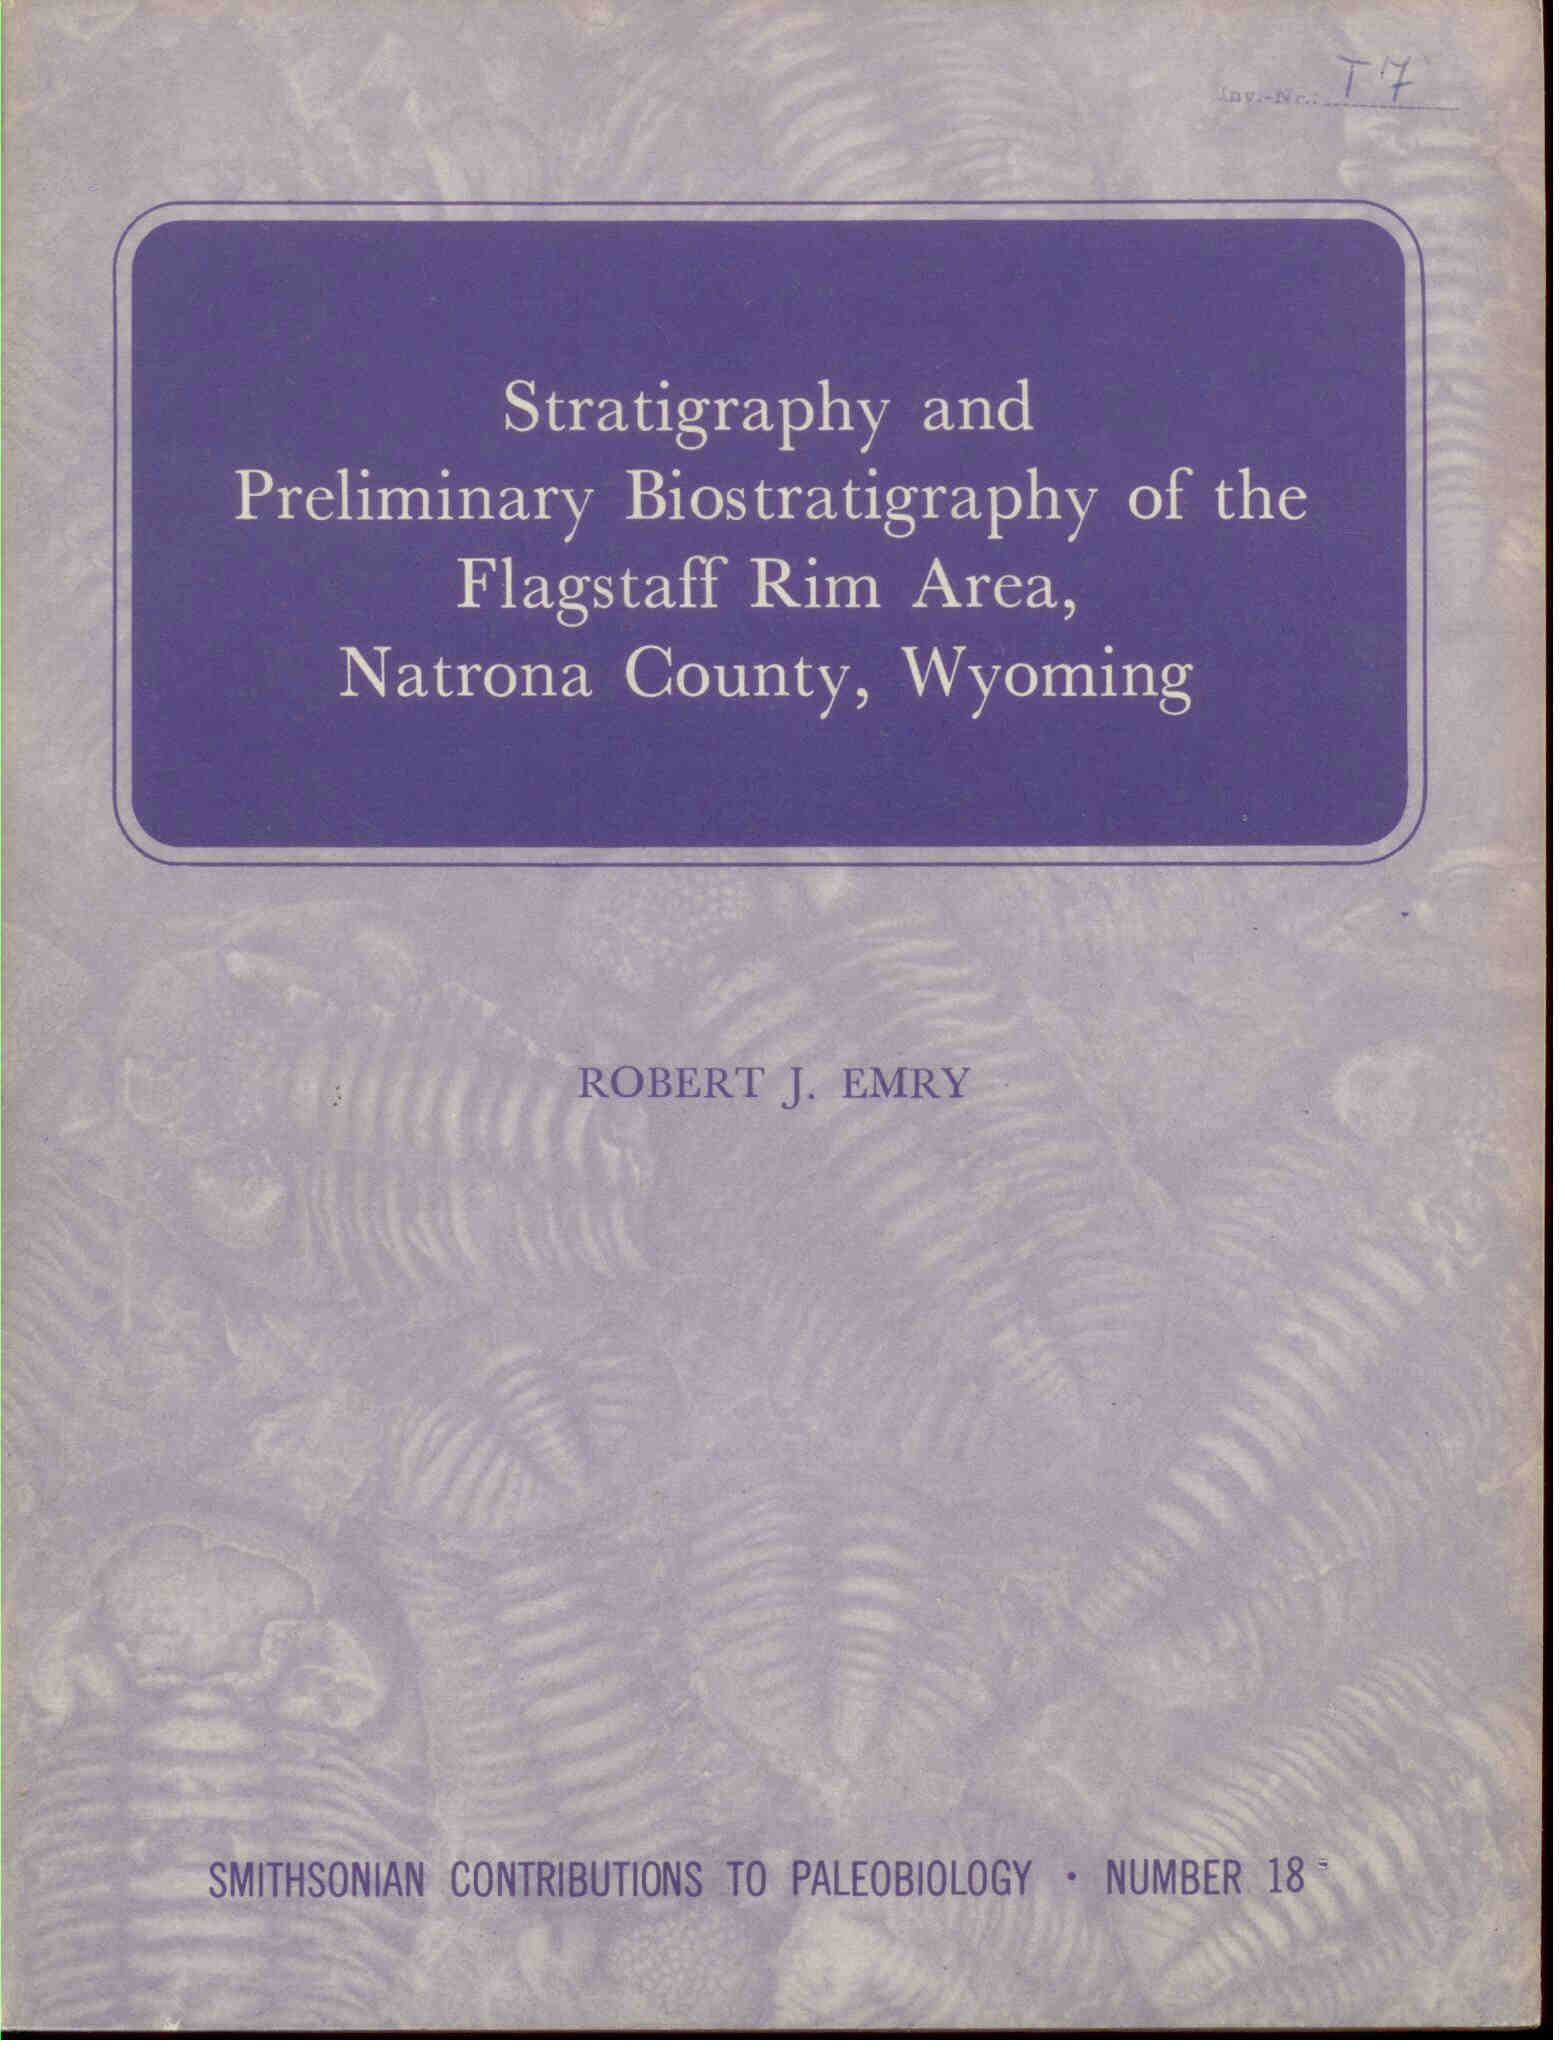 Emry, R.J.: Stratigraphy and Preliminary Biostratigraphy of the Flagstaff Rim Area, Natrona County, Wyoming